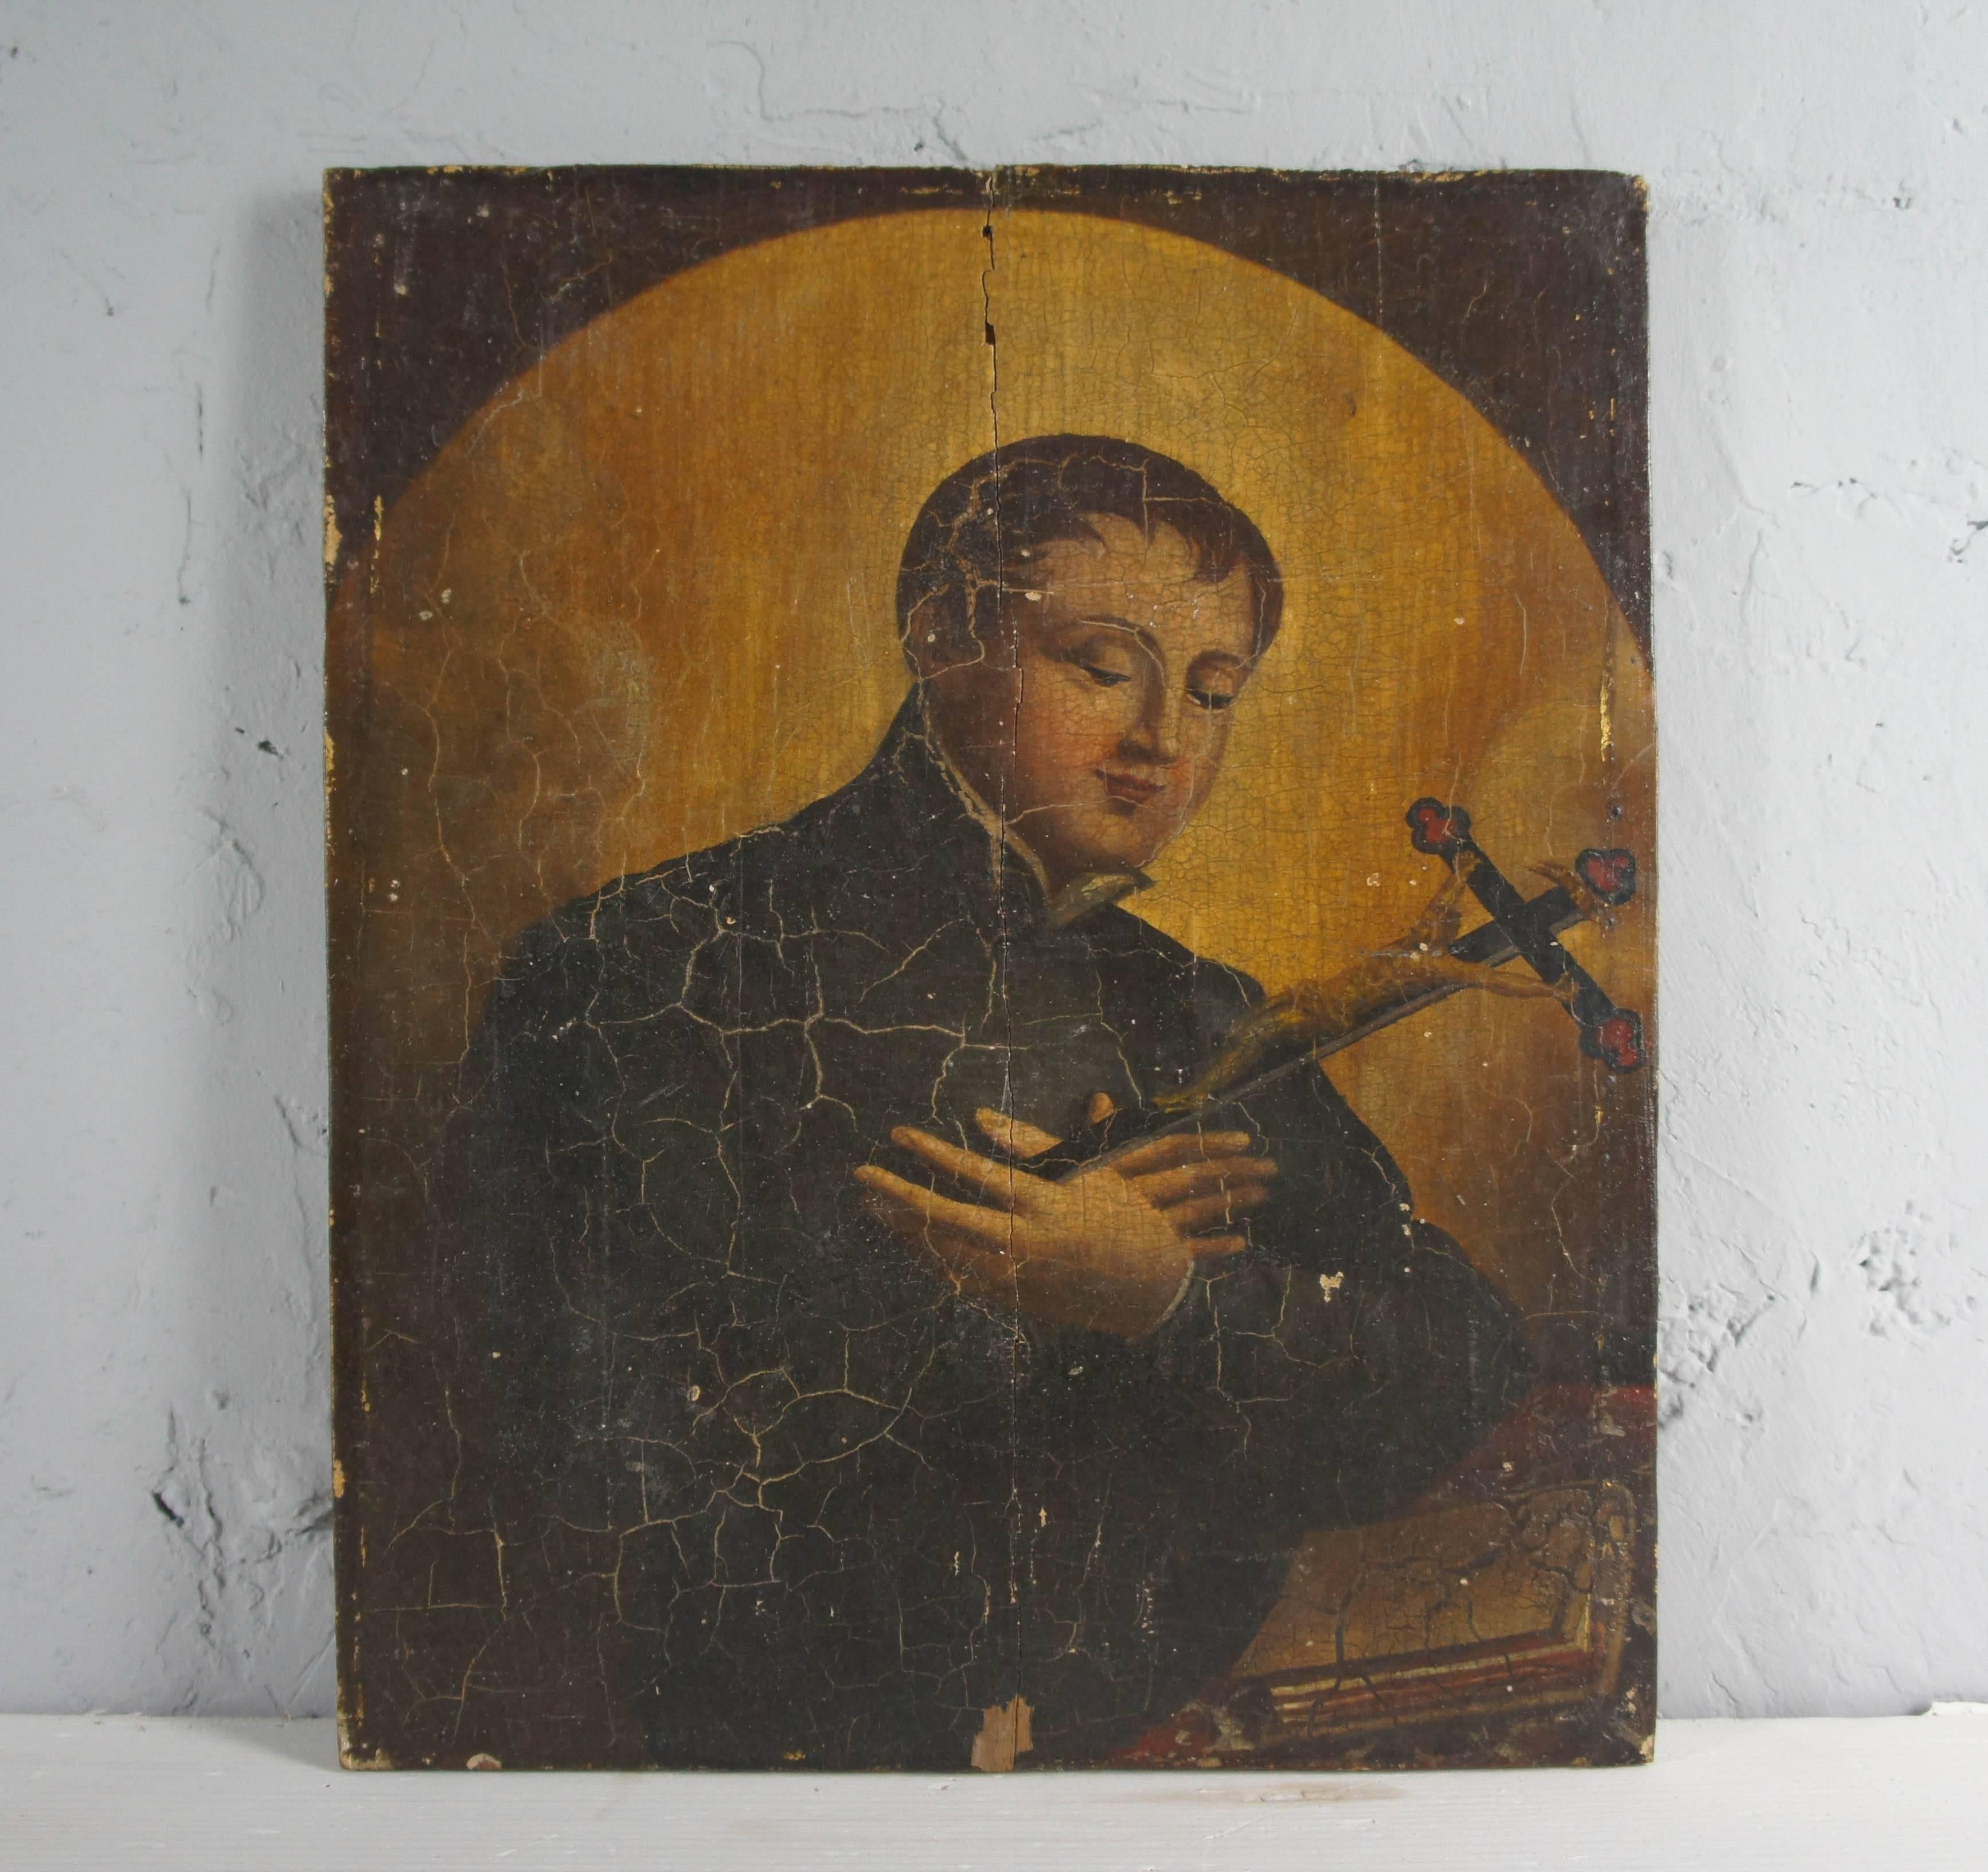 Stunning oil painting of St. Aloysius Gonzaga (1568-1591), a Jesuit priest, on hardwood. Sourced from the private collection of the English Dominican Congregation of St Catherine of Siena, stone, Staffordshire. A rare piece of Reformation iconology.